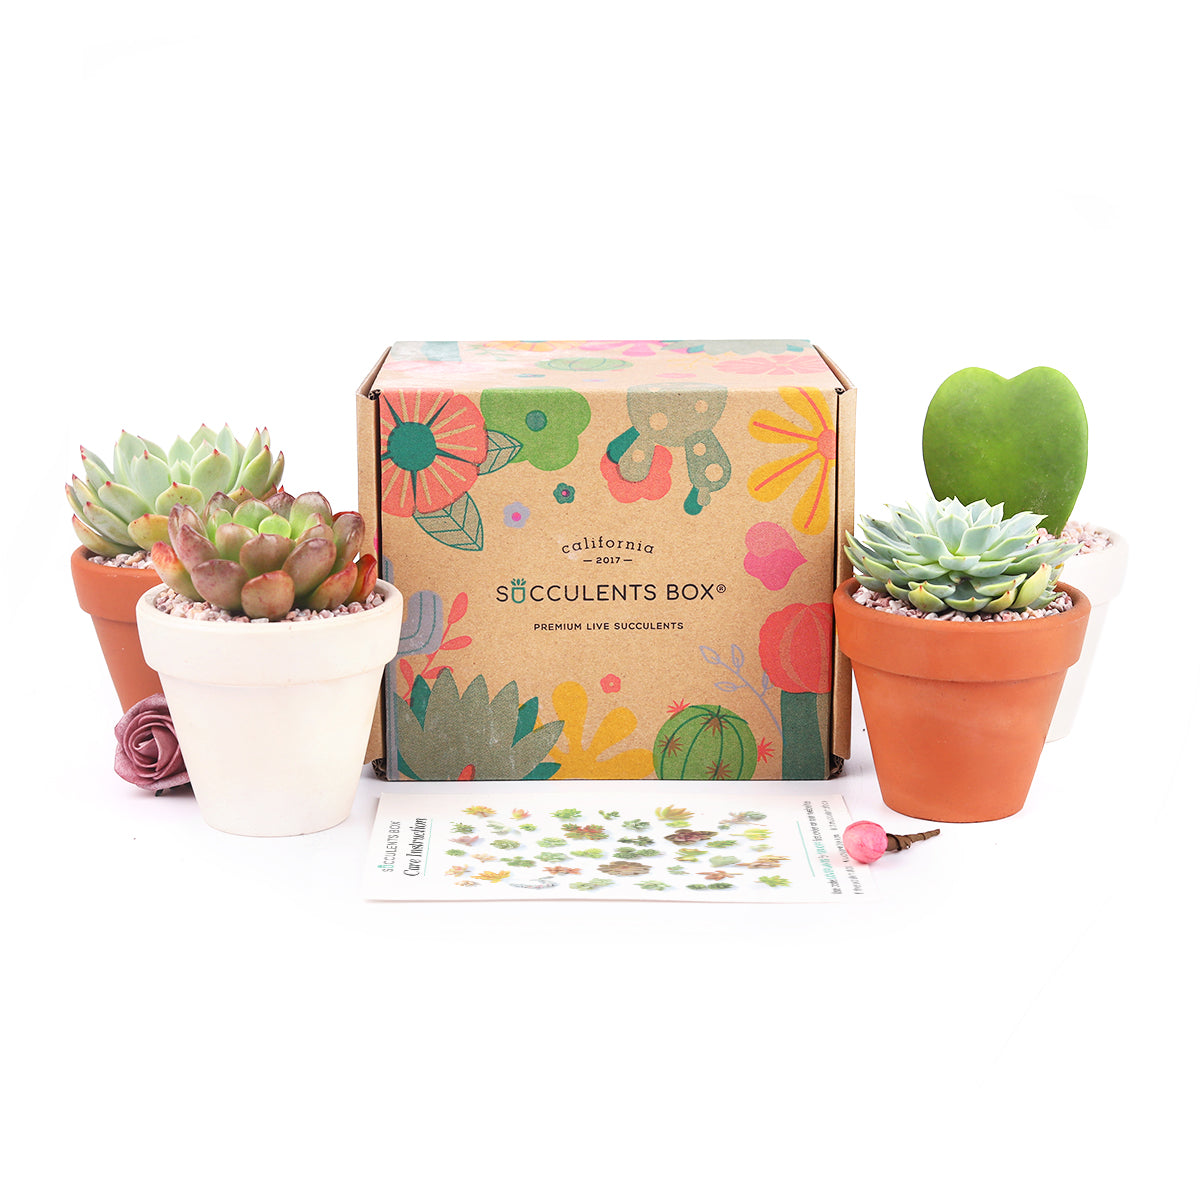 Types of Succulents, Succulents Shop in California, Succulents and Cactus Plants, Subscription Box with Care Instruction, Succulent Subscription Box, best subscription box, subscription box gifts, subscription box service, mother's day gift ideas, best mother's day gifts, personalized mother's day gifts, mother day gifts